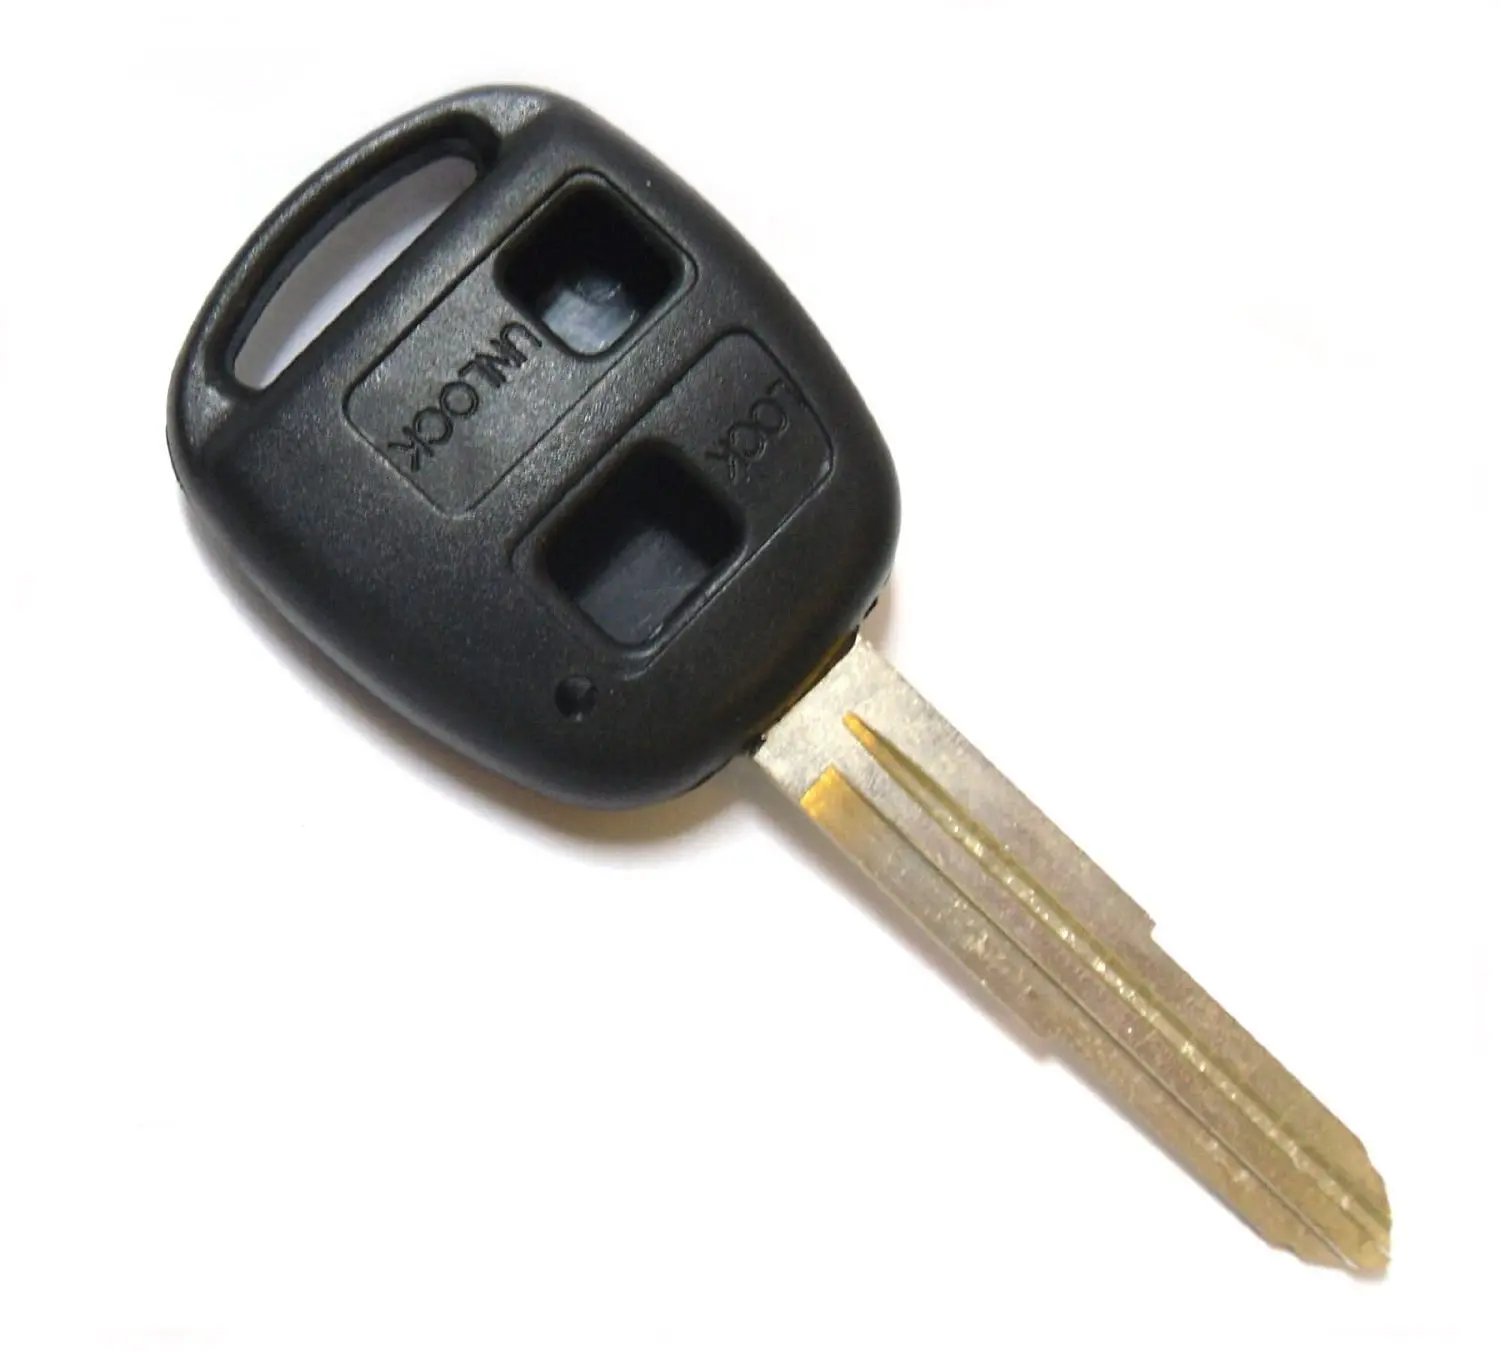 vw key fob replacement